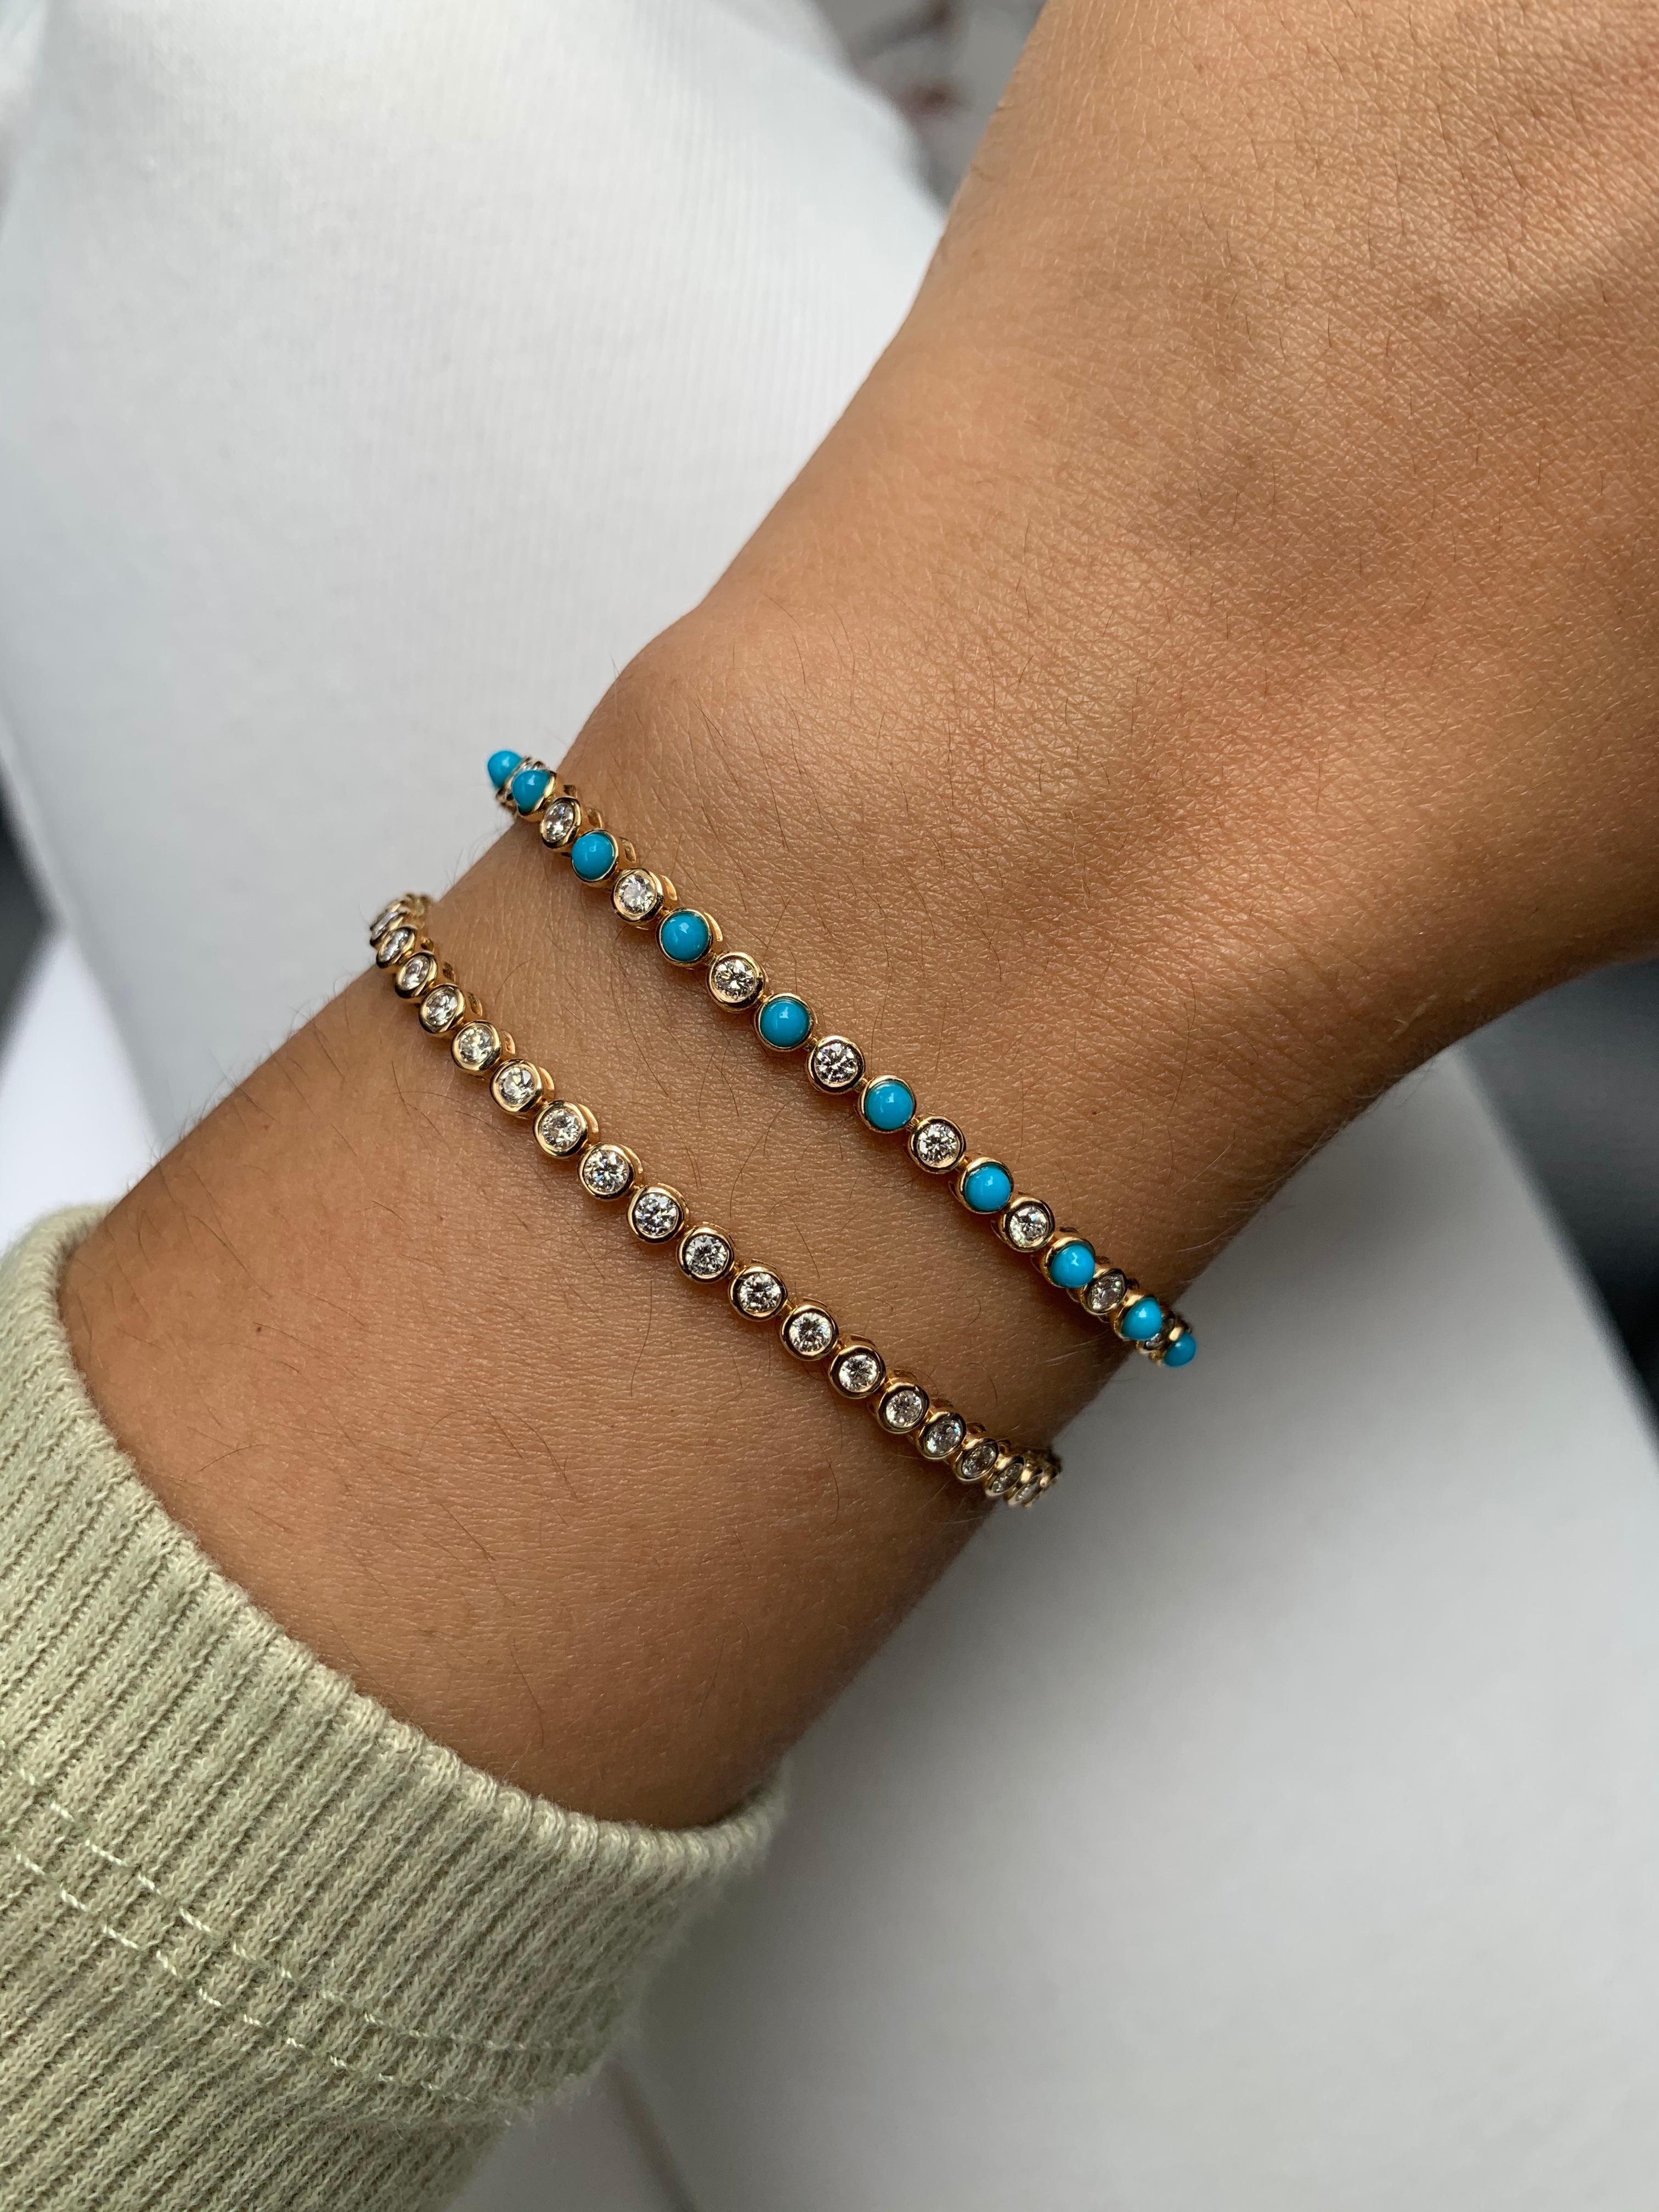 This diamond and gemstone collection showcases elegant pieces that are extremely versatile and a timeless addition to your jewelry collection. These pieces are part of our dainty and fine jewelry line known as TanisaJewelry - see more on Instagram